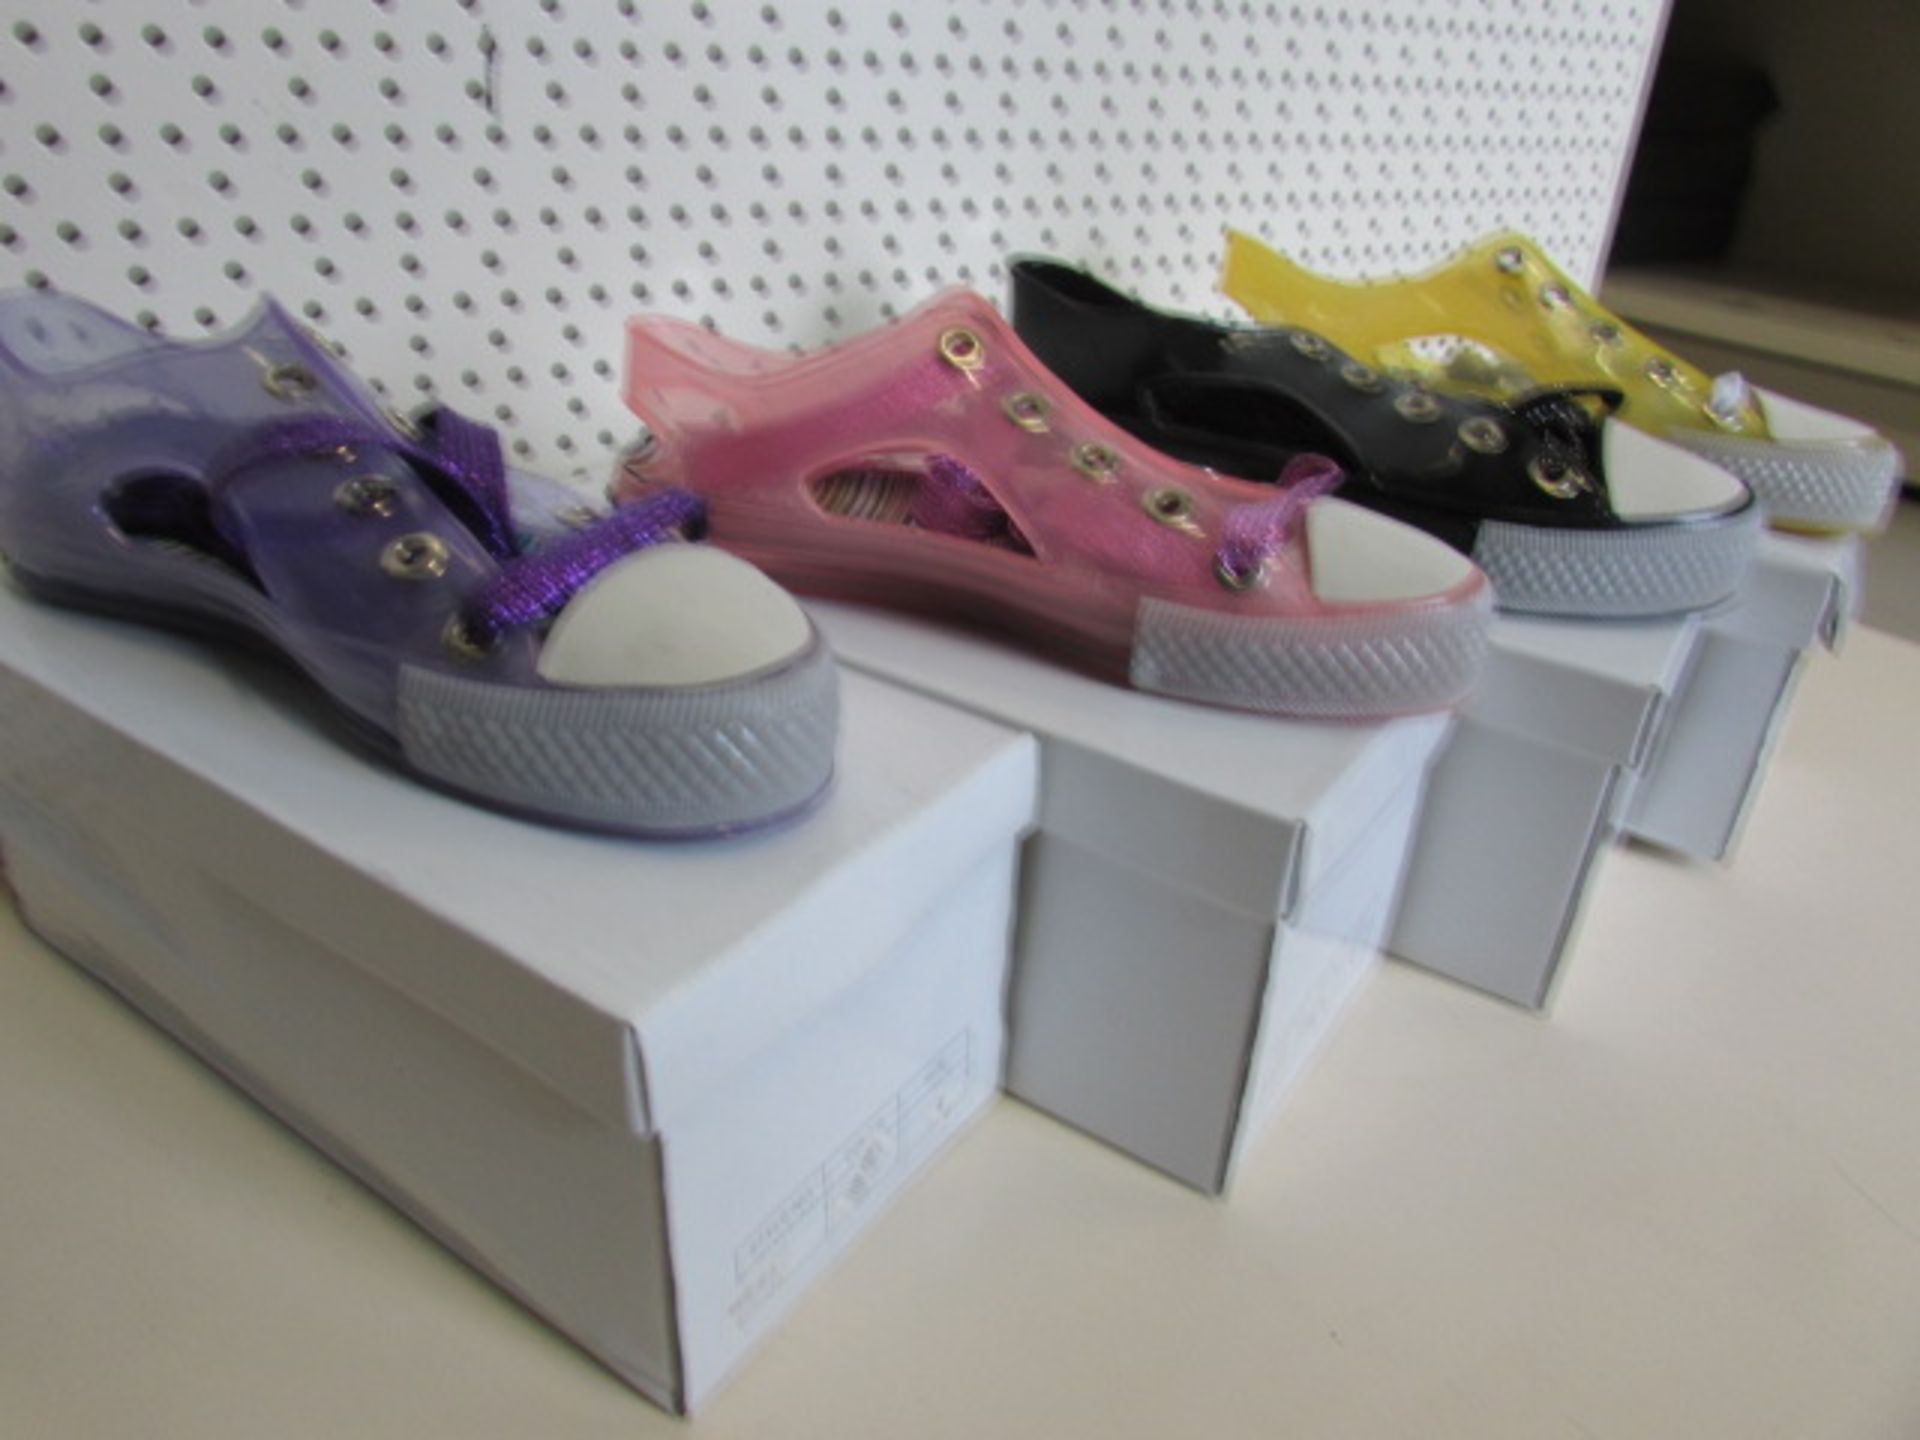 10 x Cyclone Paradise Lace Up Shoes In Various Sizes & Colours - Image 3 of 3